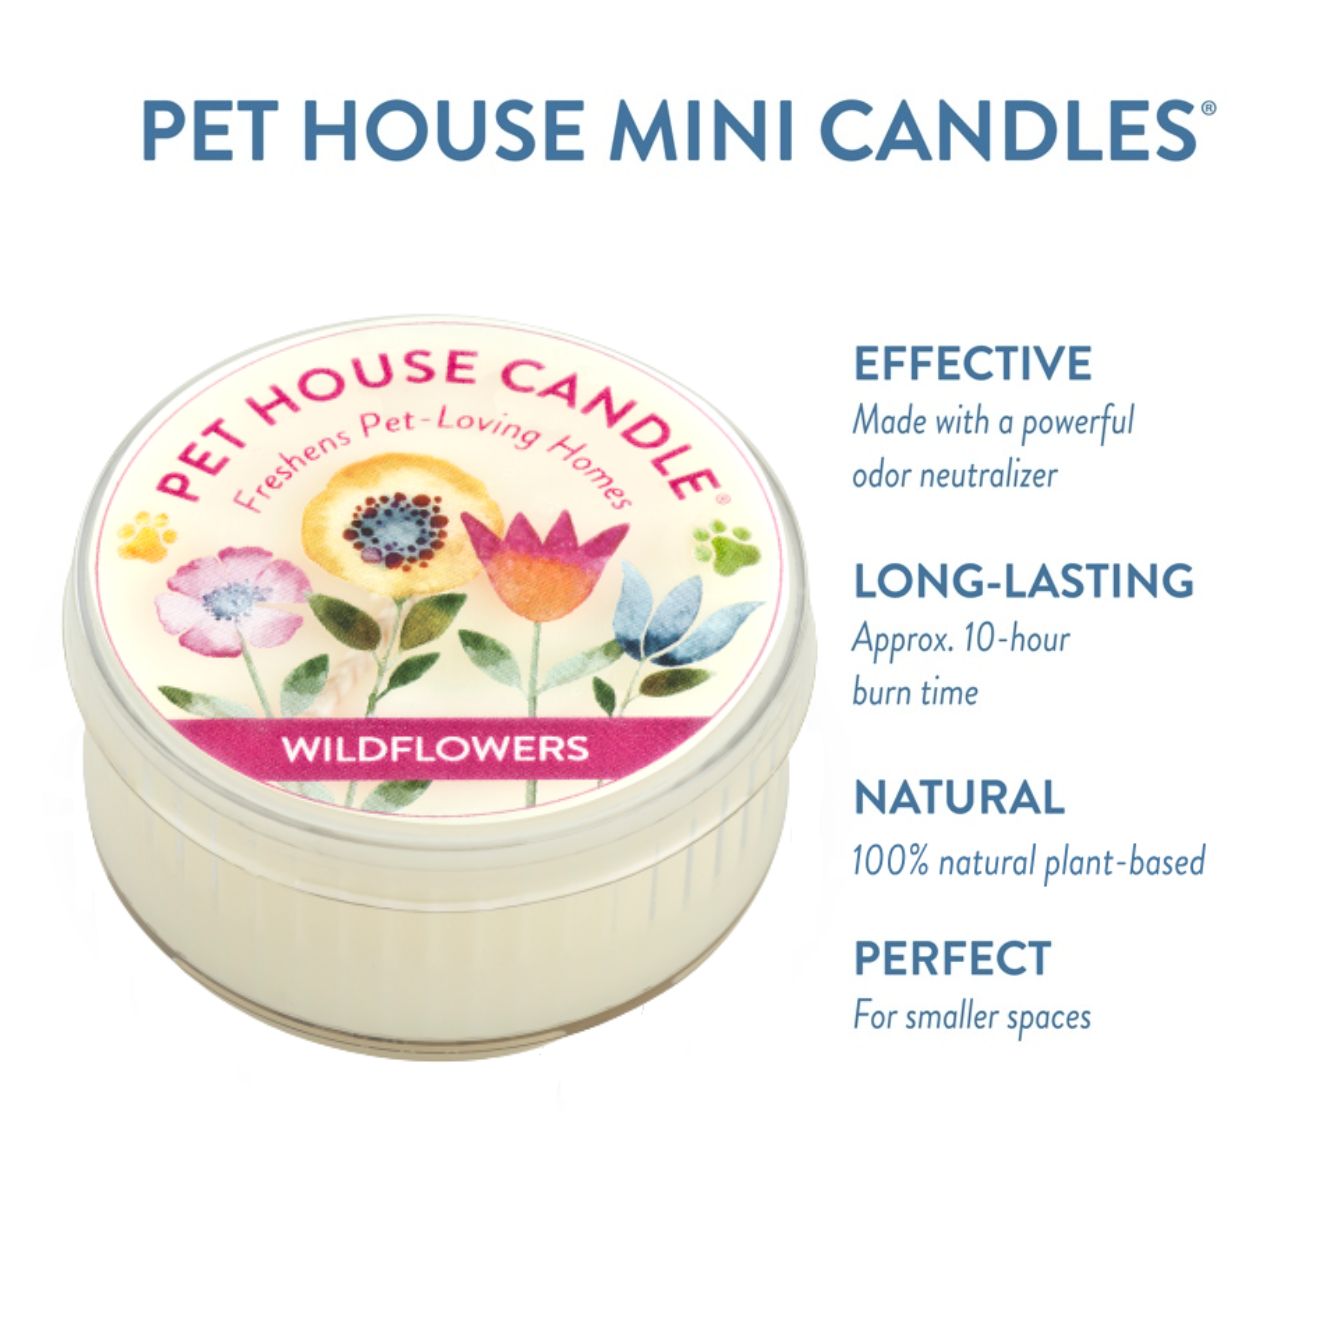 Wildflowers Mini Candle infographics